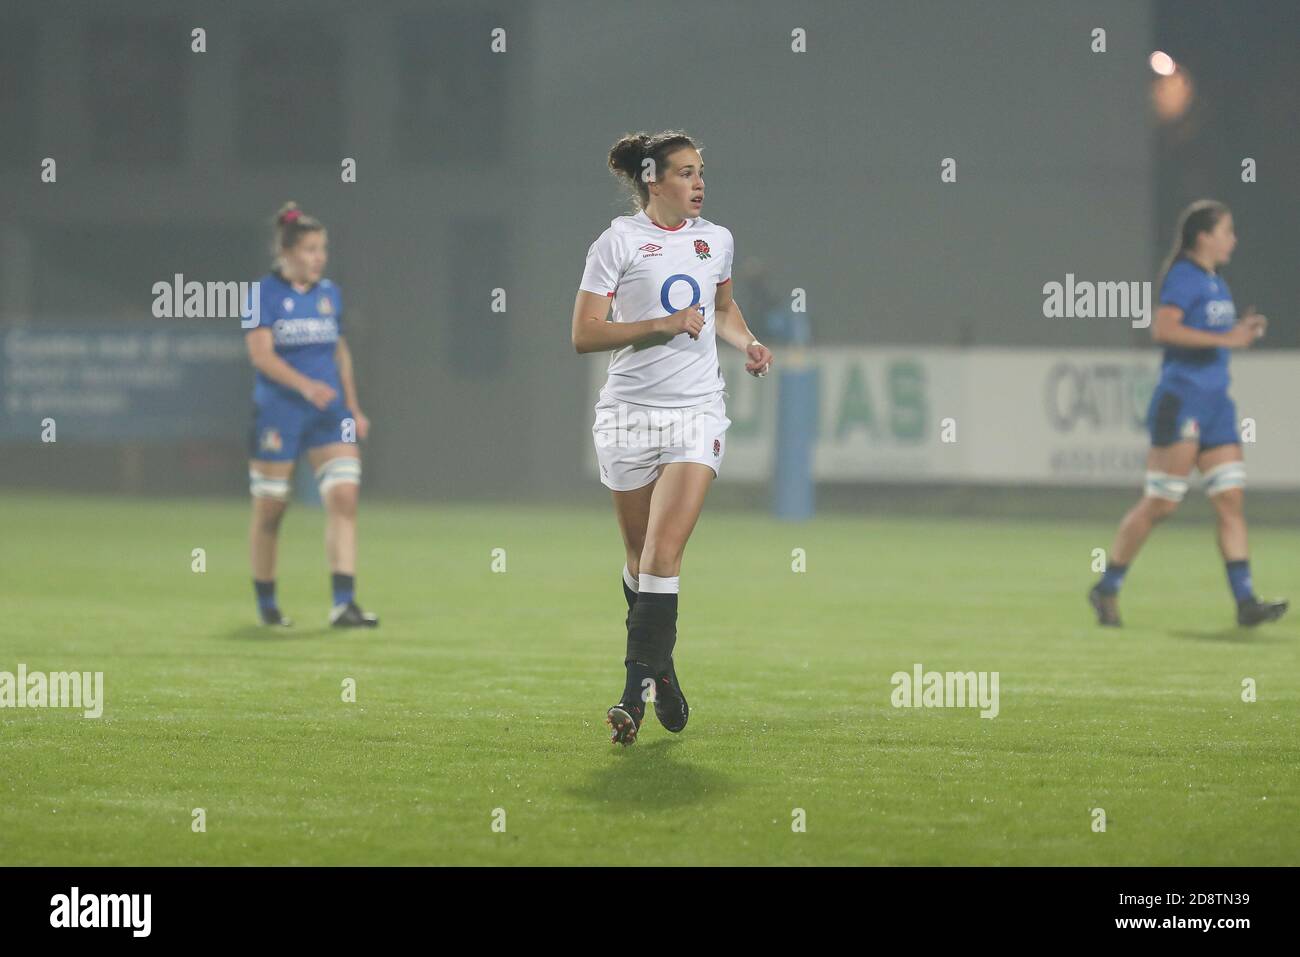 Sergio Lanfranchi stadium, parma, Italy, 01 Nov 2020, England captain Emily Scarratt scores the first try for his team during Women&#39;s Guinness Six Nations 2020 - Italy vs England, Rugby Six Nations match - Credit: LM/Massimiliano Carnabuci/Alamy Live News Stock Photo